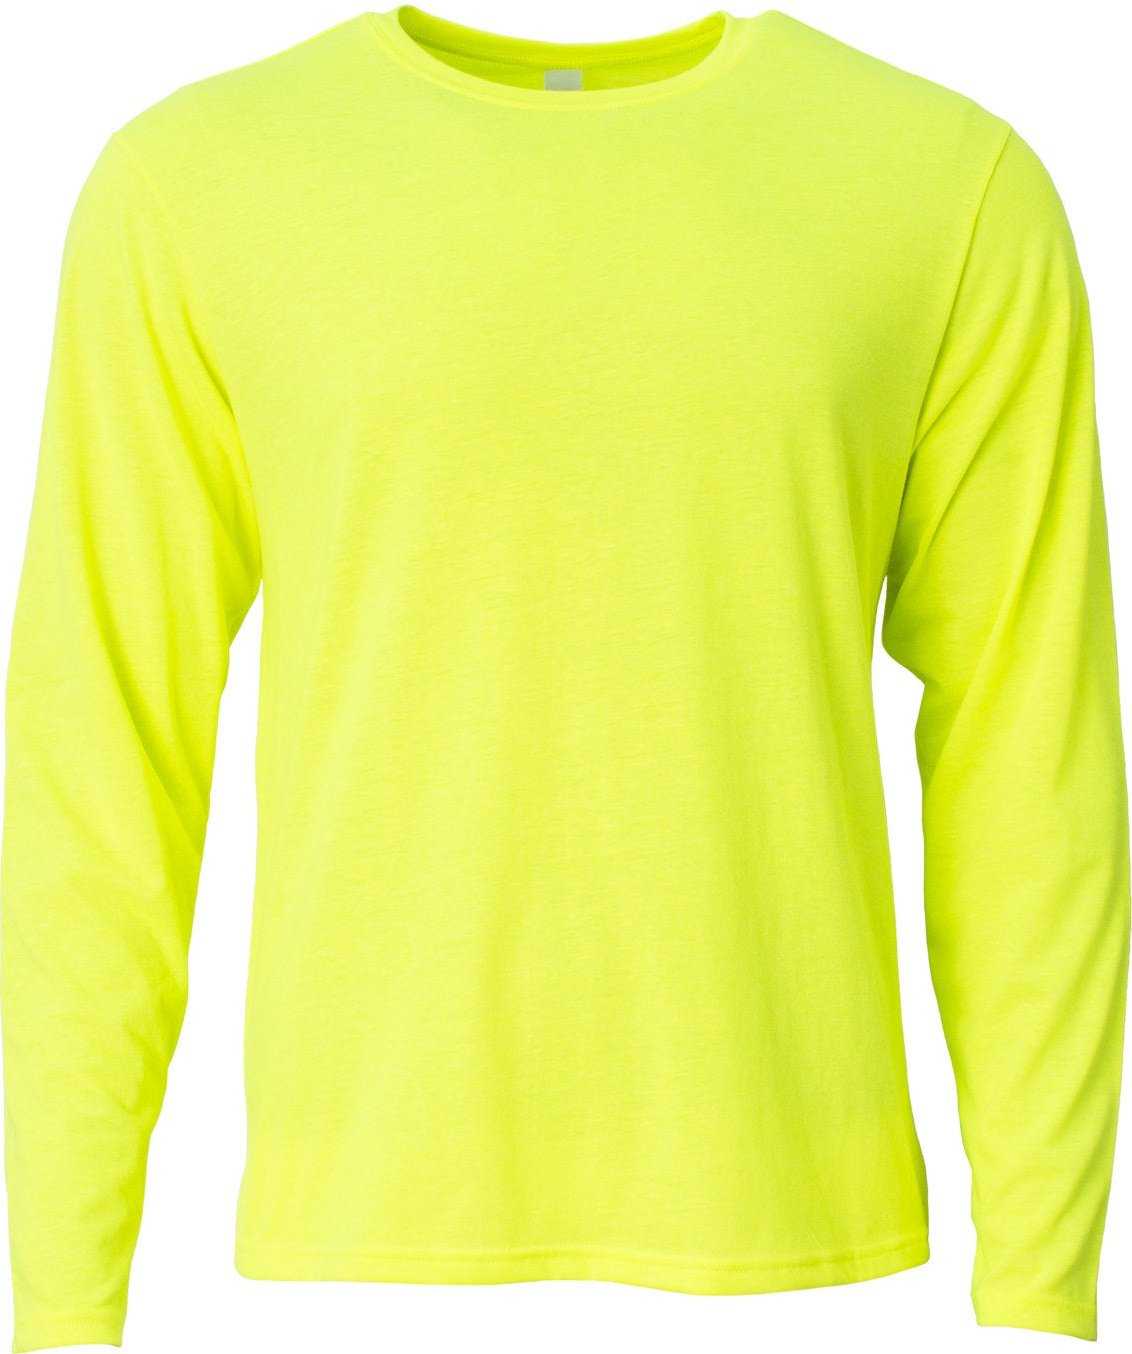 A4 NB3029 Youth Long Sleeve Softek T-Shirt - Safety Yellow